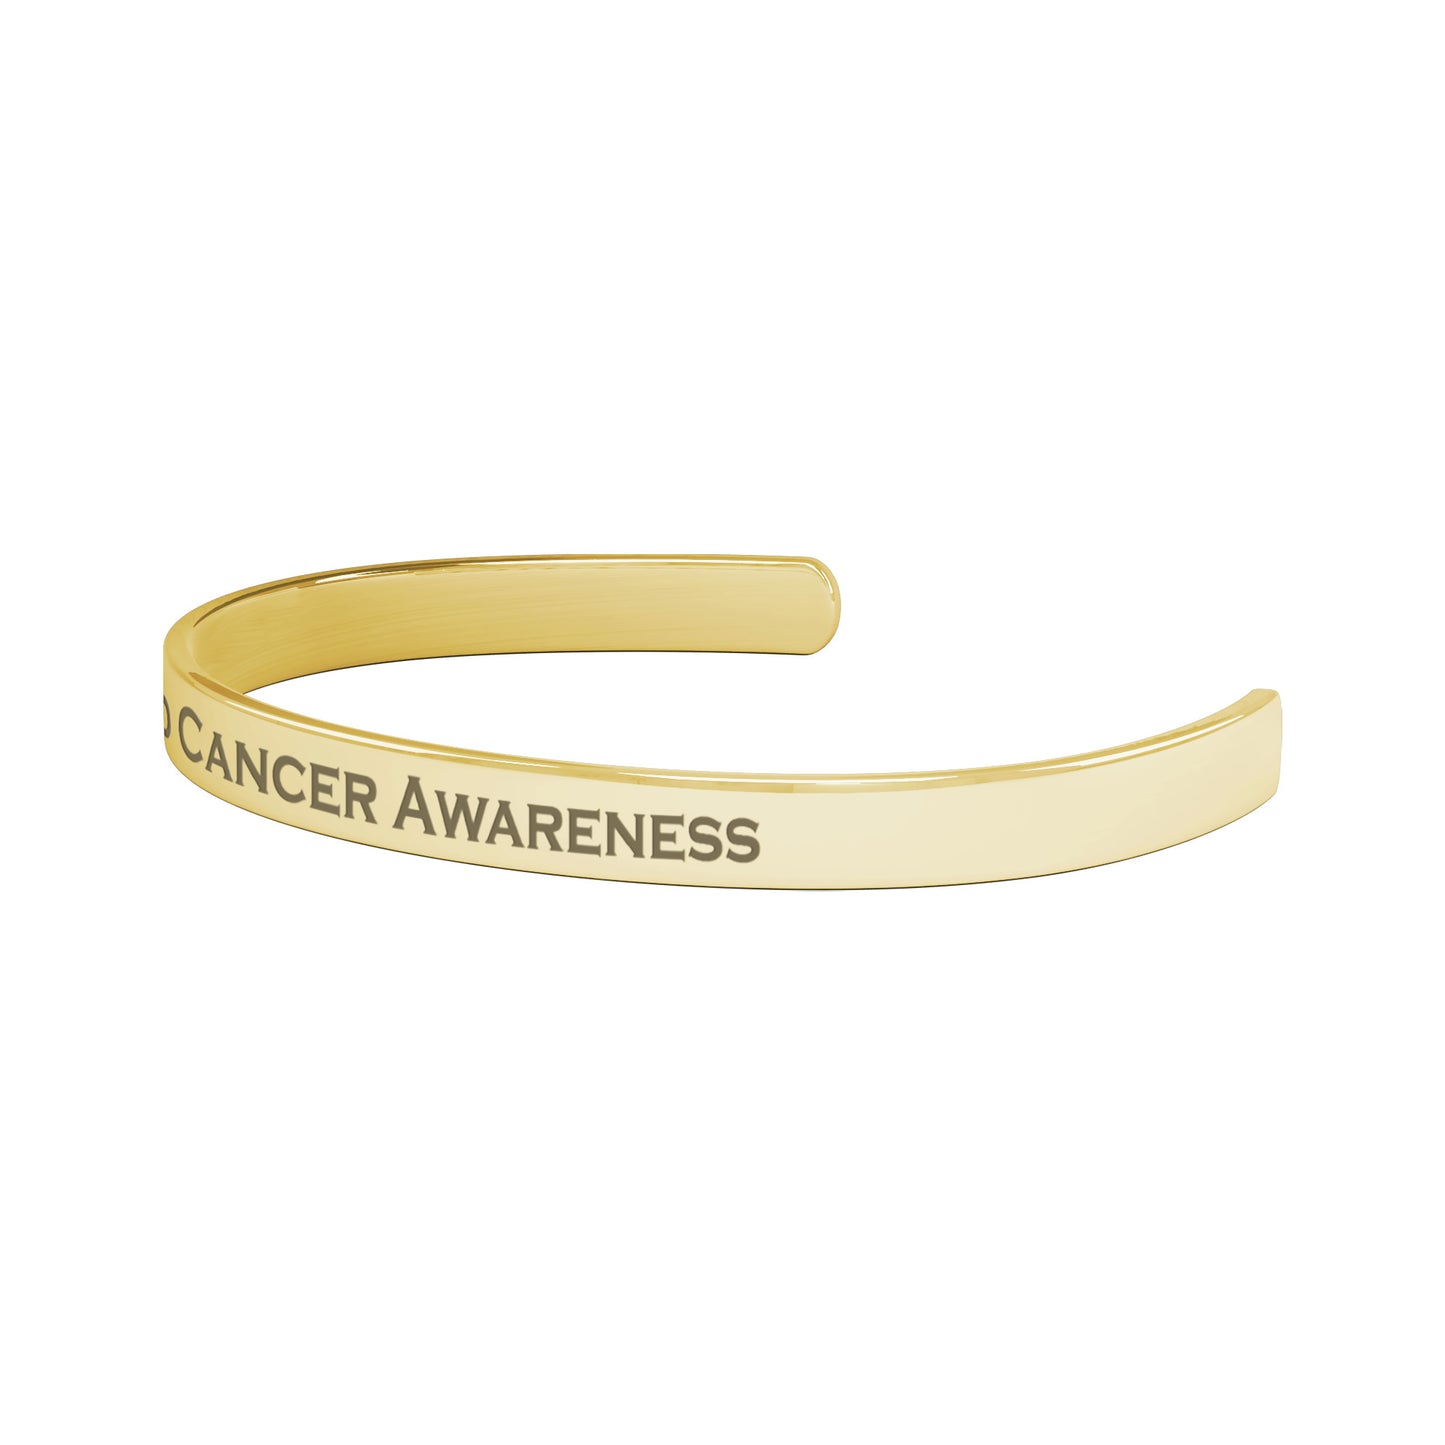 Personalized Thyroid Cancer Awareness Cuff Bracelet